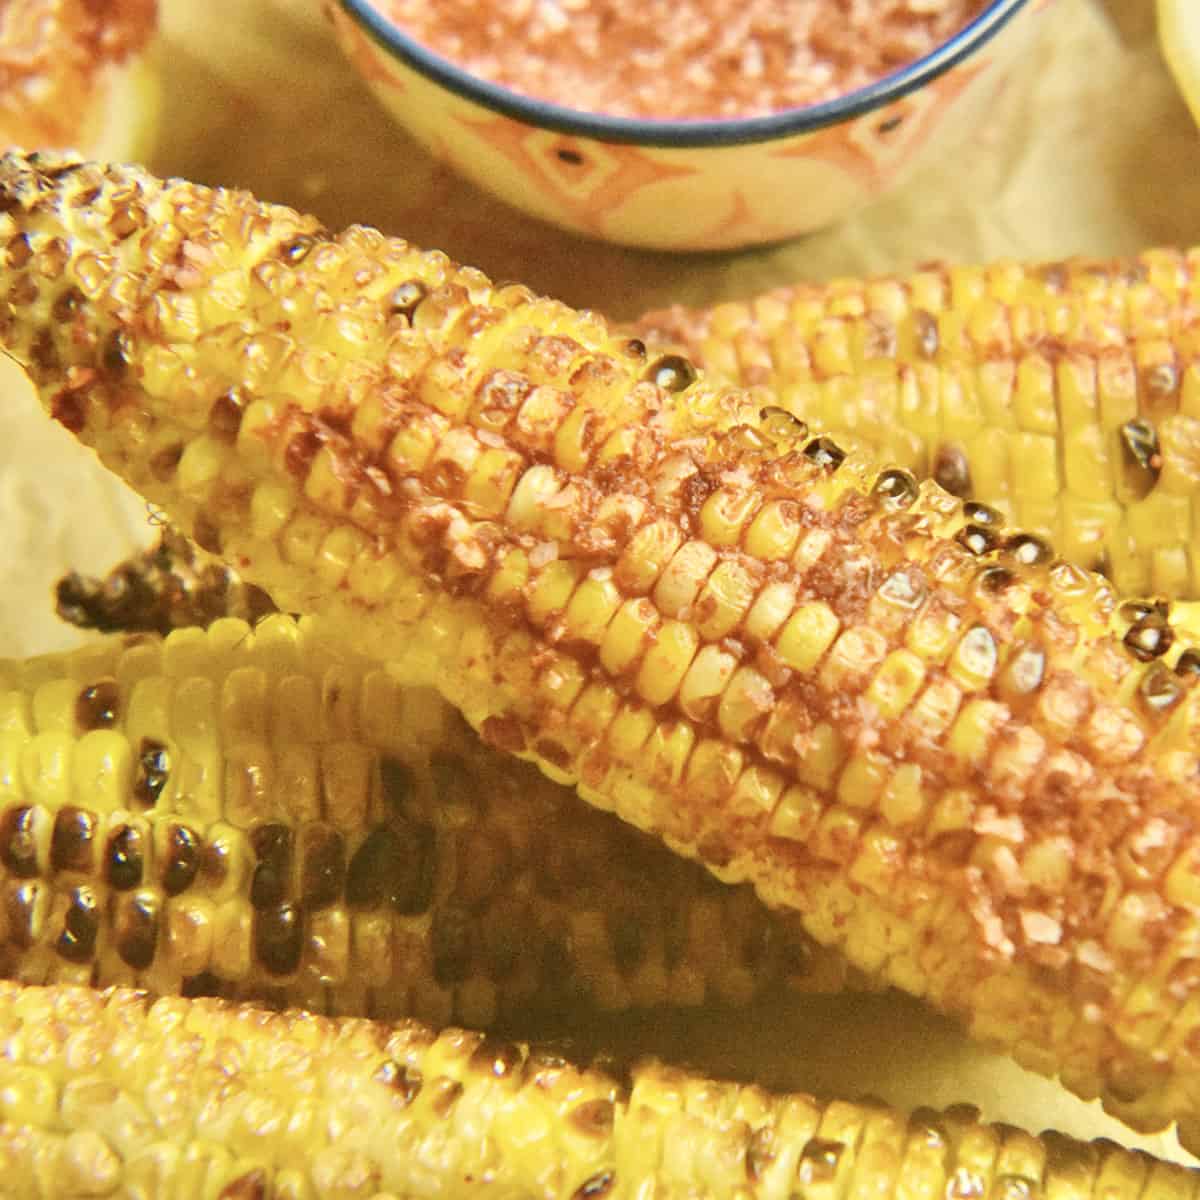 Grilled Corn With Chaat Masala Recipe